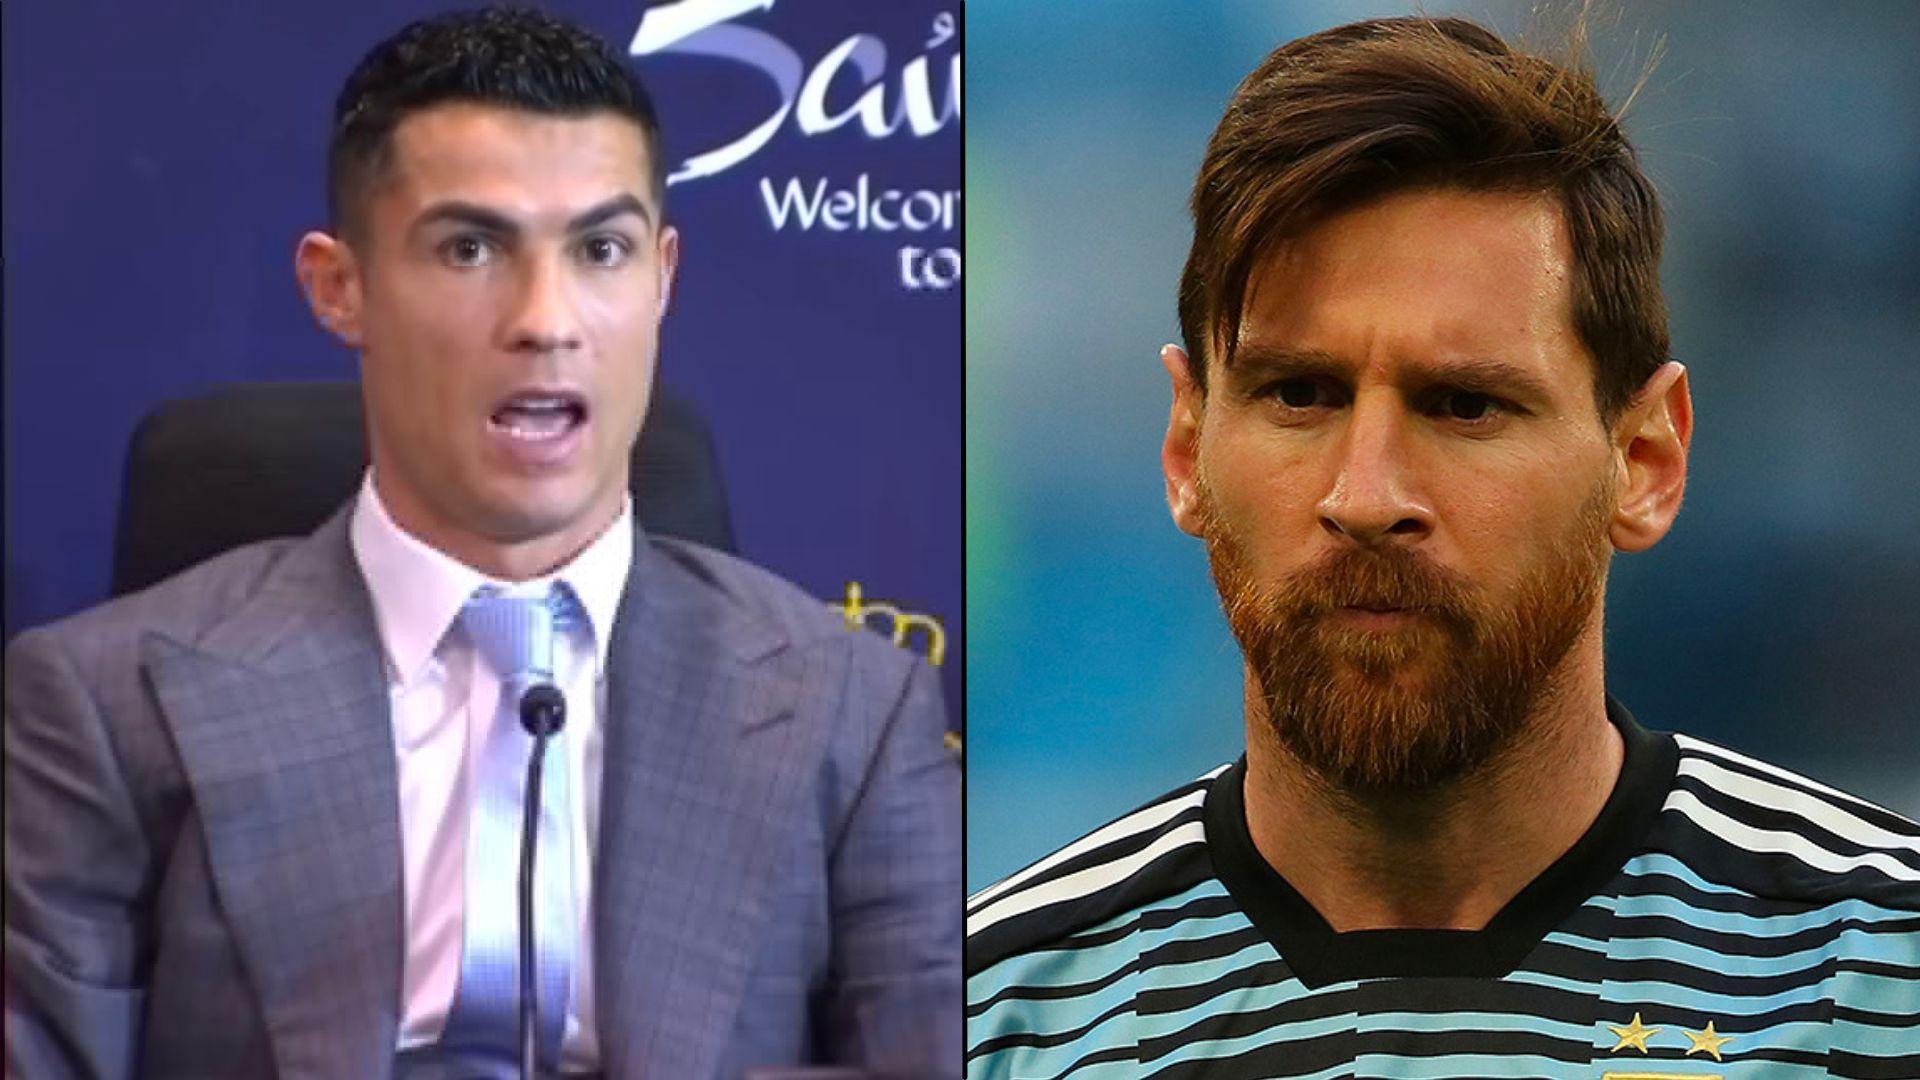 Cristiano Ronaldo in suit sat in press conference alongside Lionel Messi in Argentina jersey